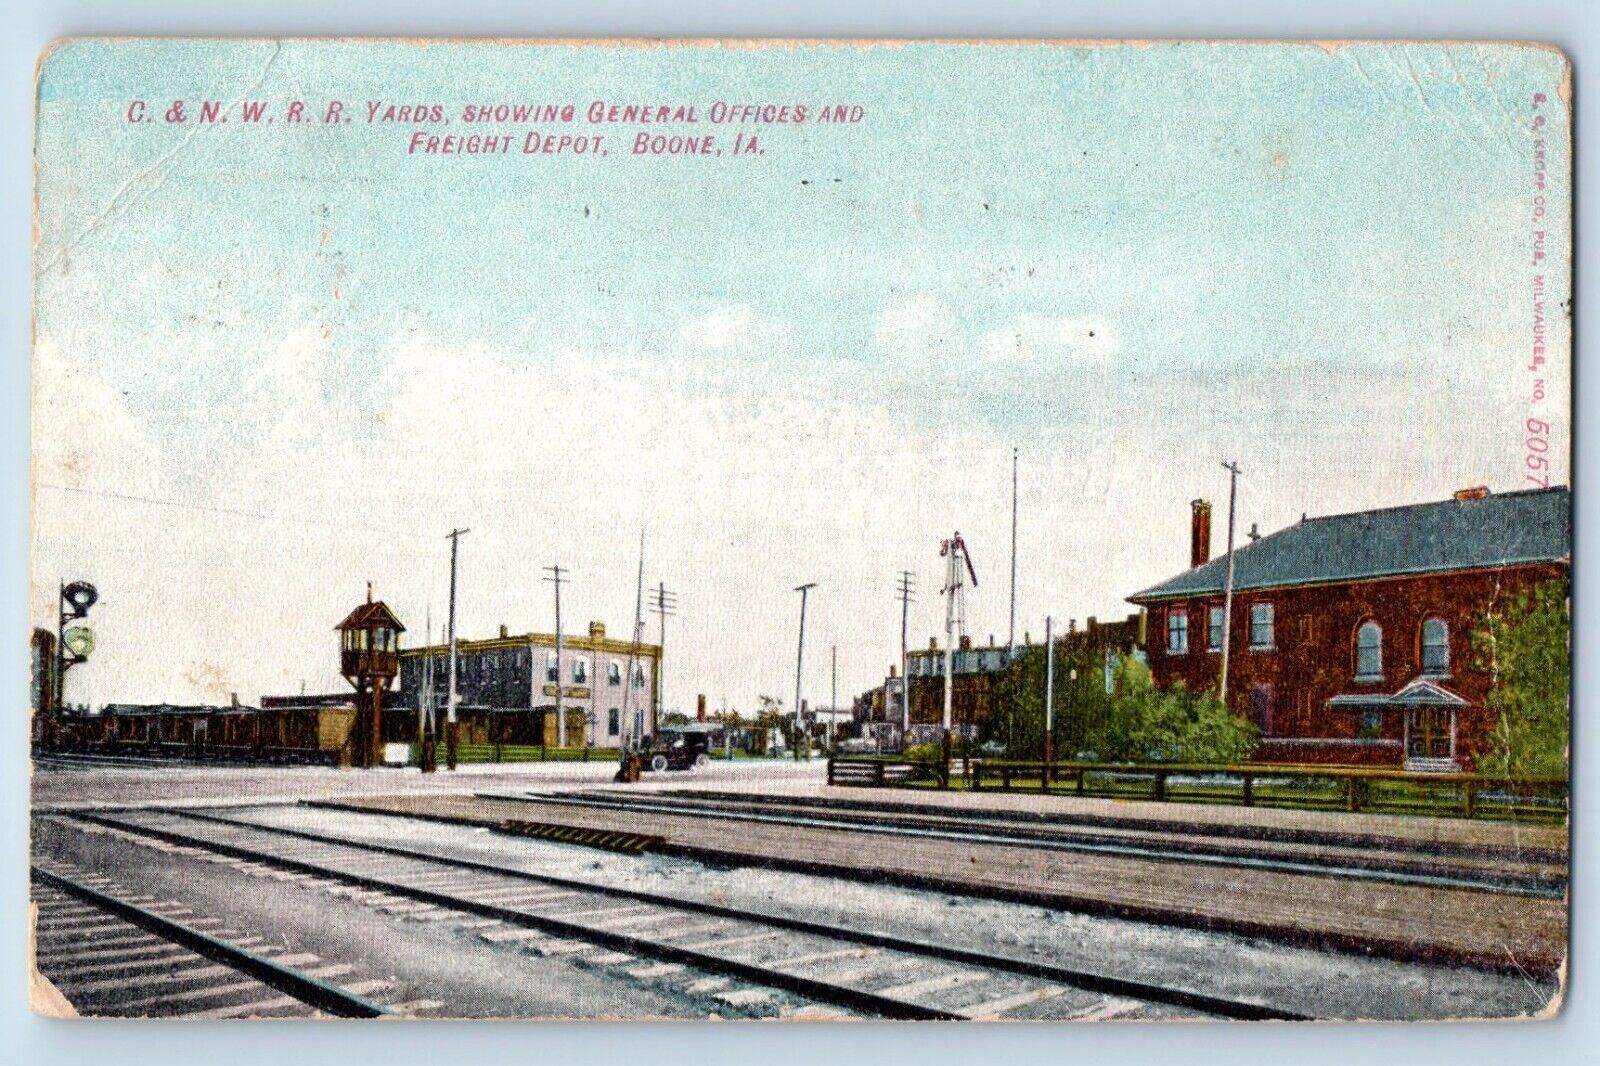 Boone Iowa IA Postcard C&NWRR Yards General Offices Freight Depot 1914 Vintage